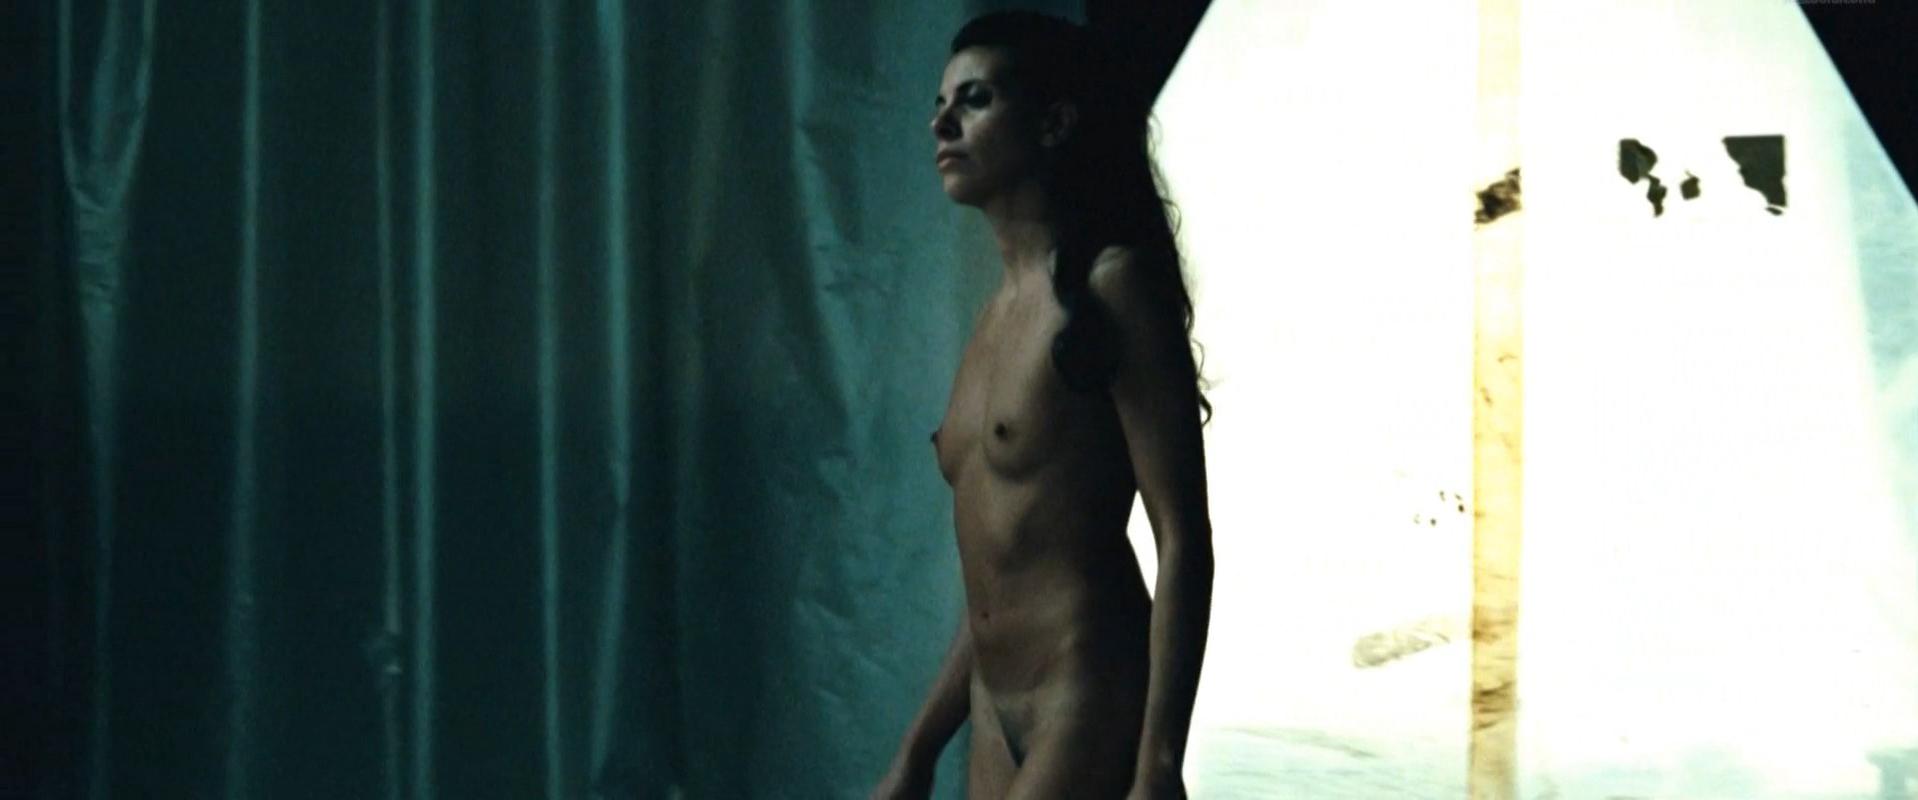 Agnes Delachair nude, Dorothee Briere nude - A l'aveugle (2012)